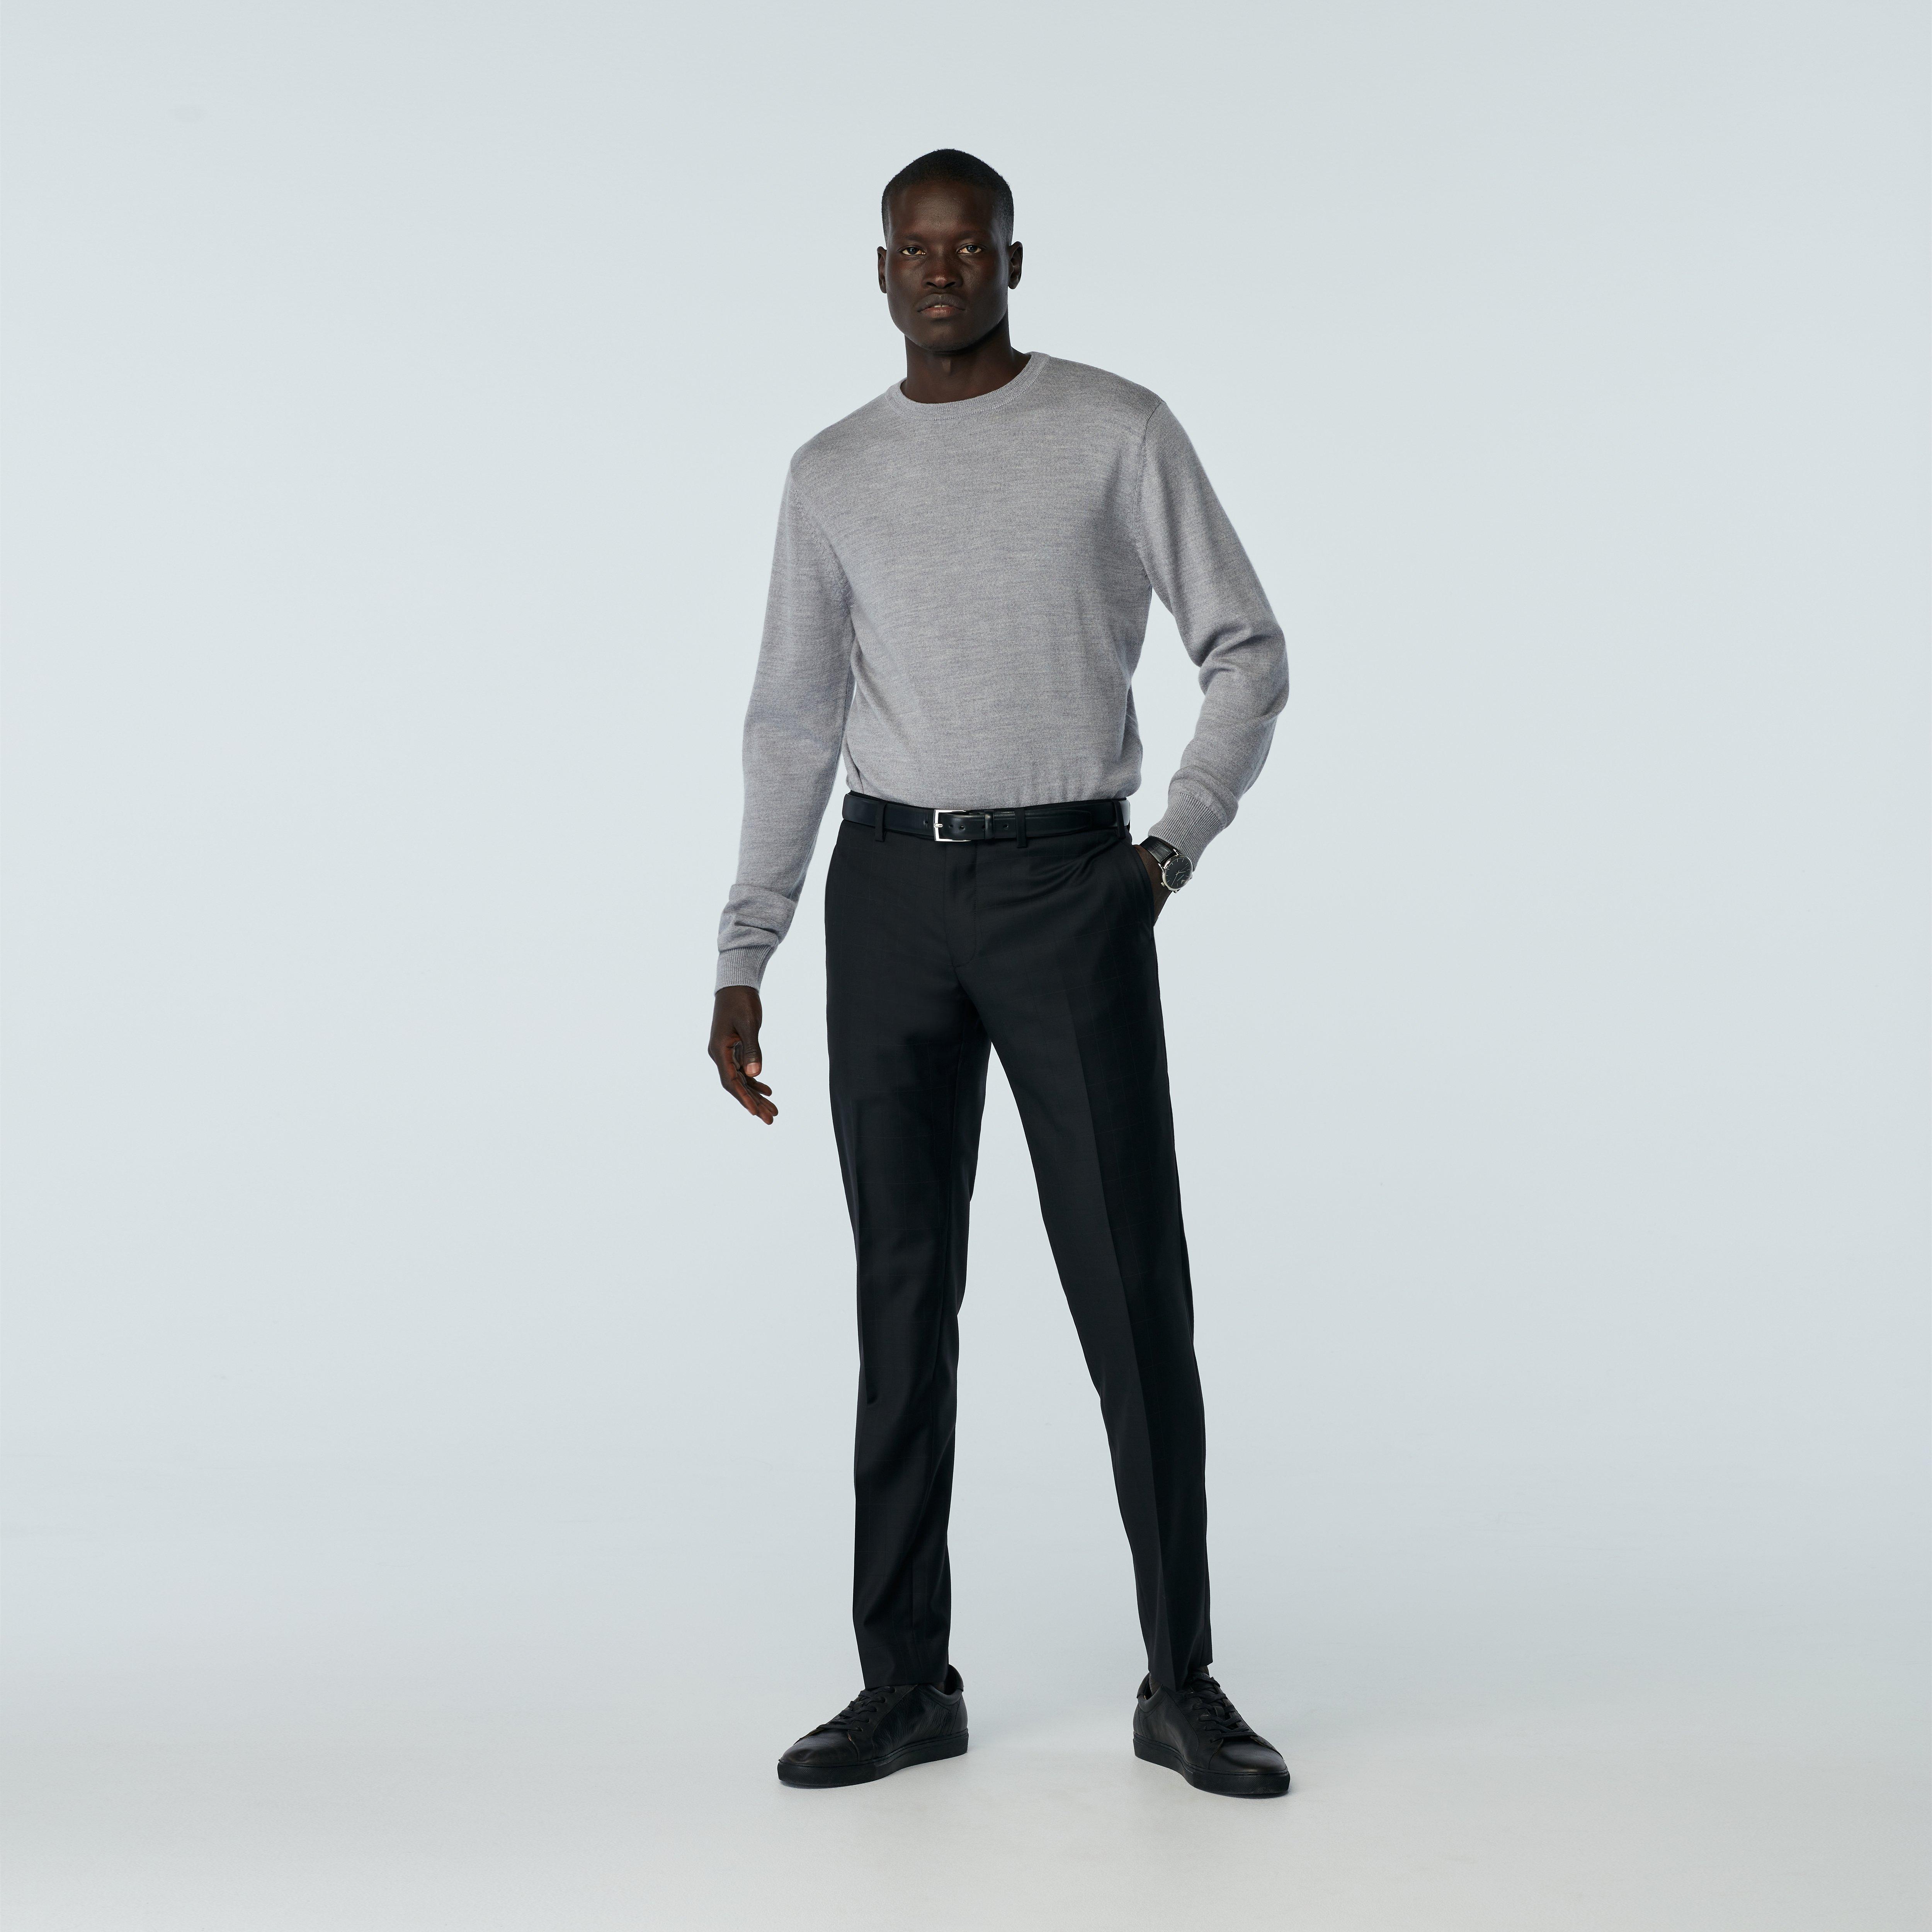 Custom Suits Made For You - Rothwell Windowpane Black Suit | INDOCHINO